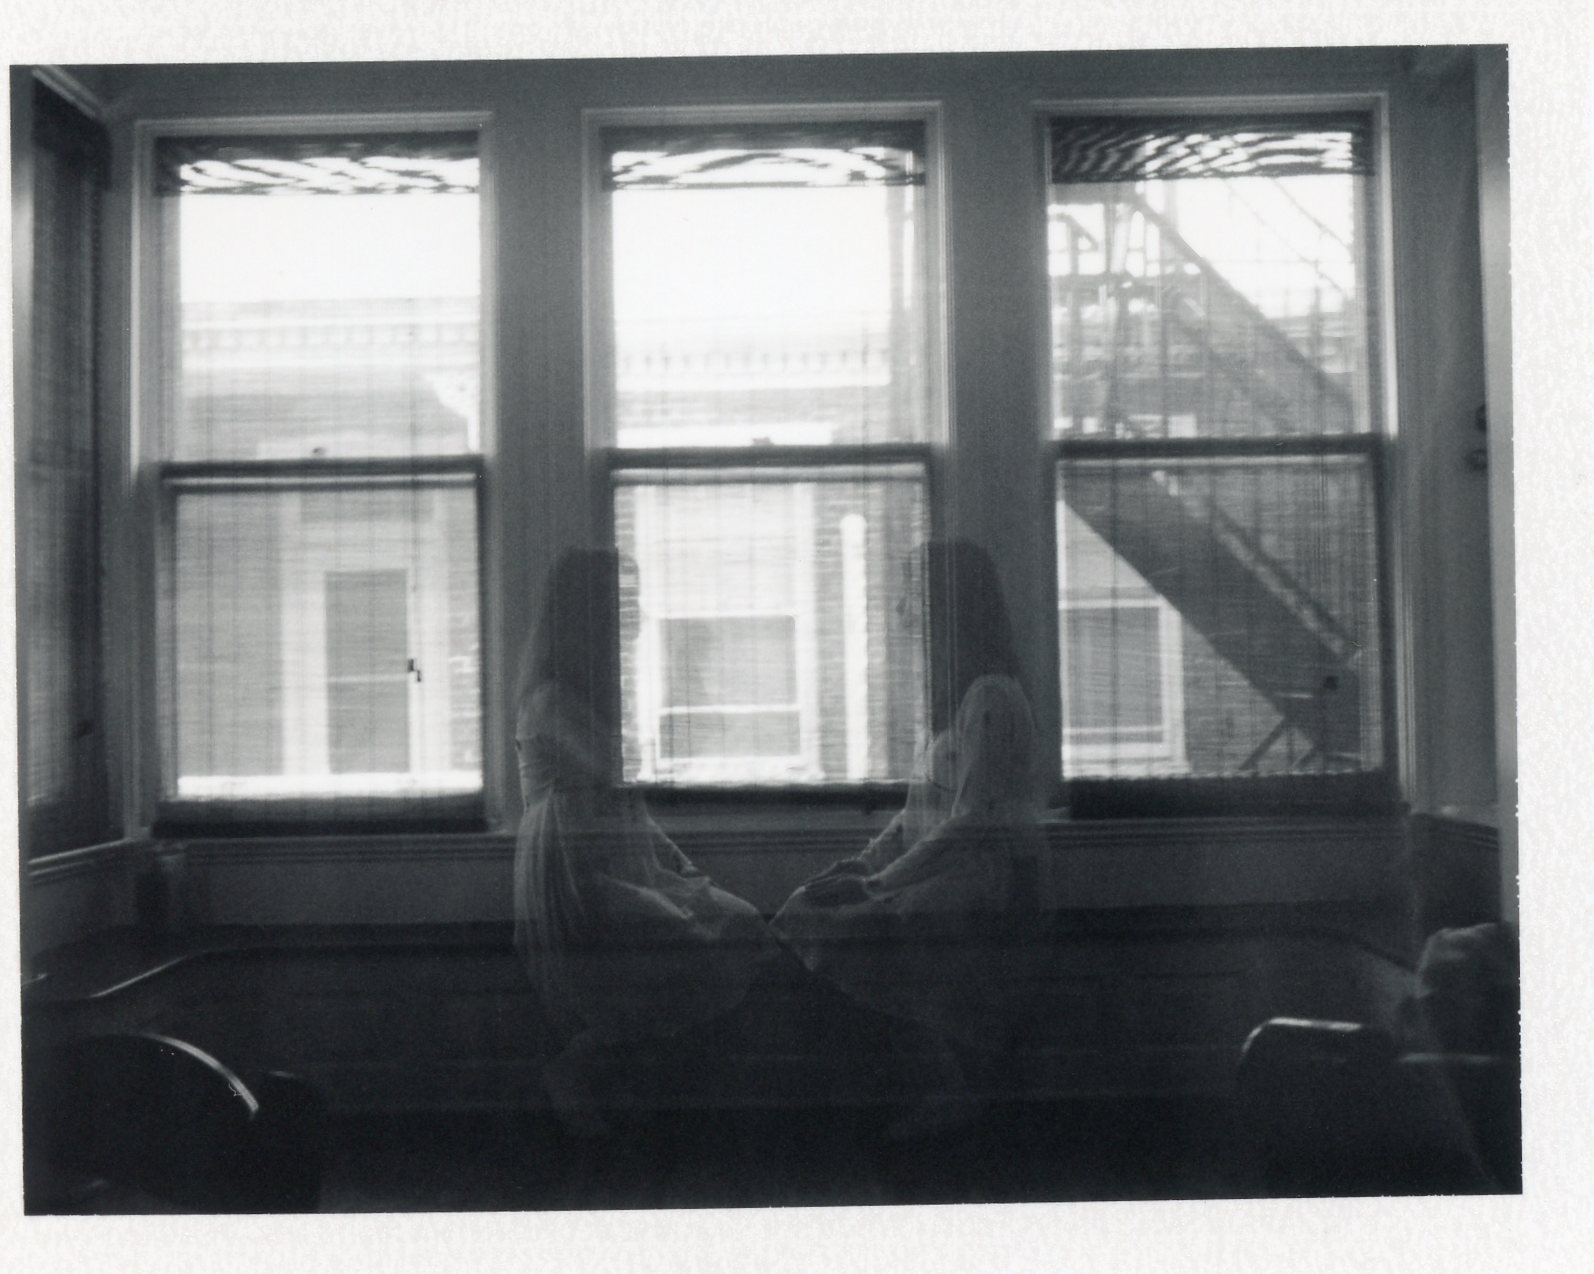 There Are So Many Different Versions Of Me | Polaroid 101 Land Camera | FP3000B | Abigail Crone